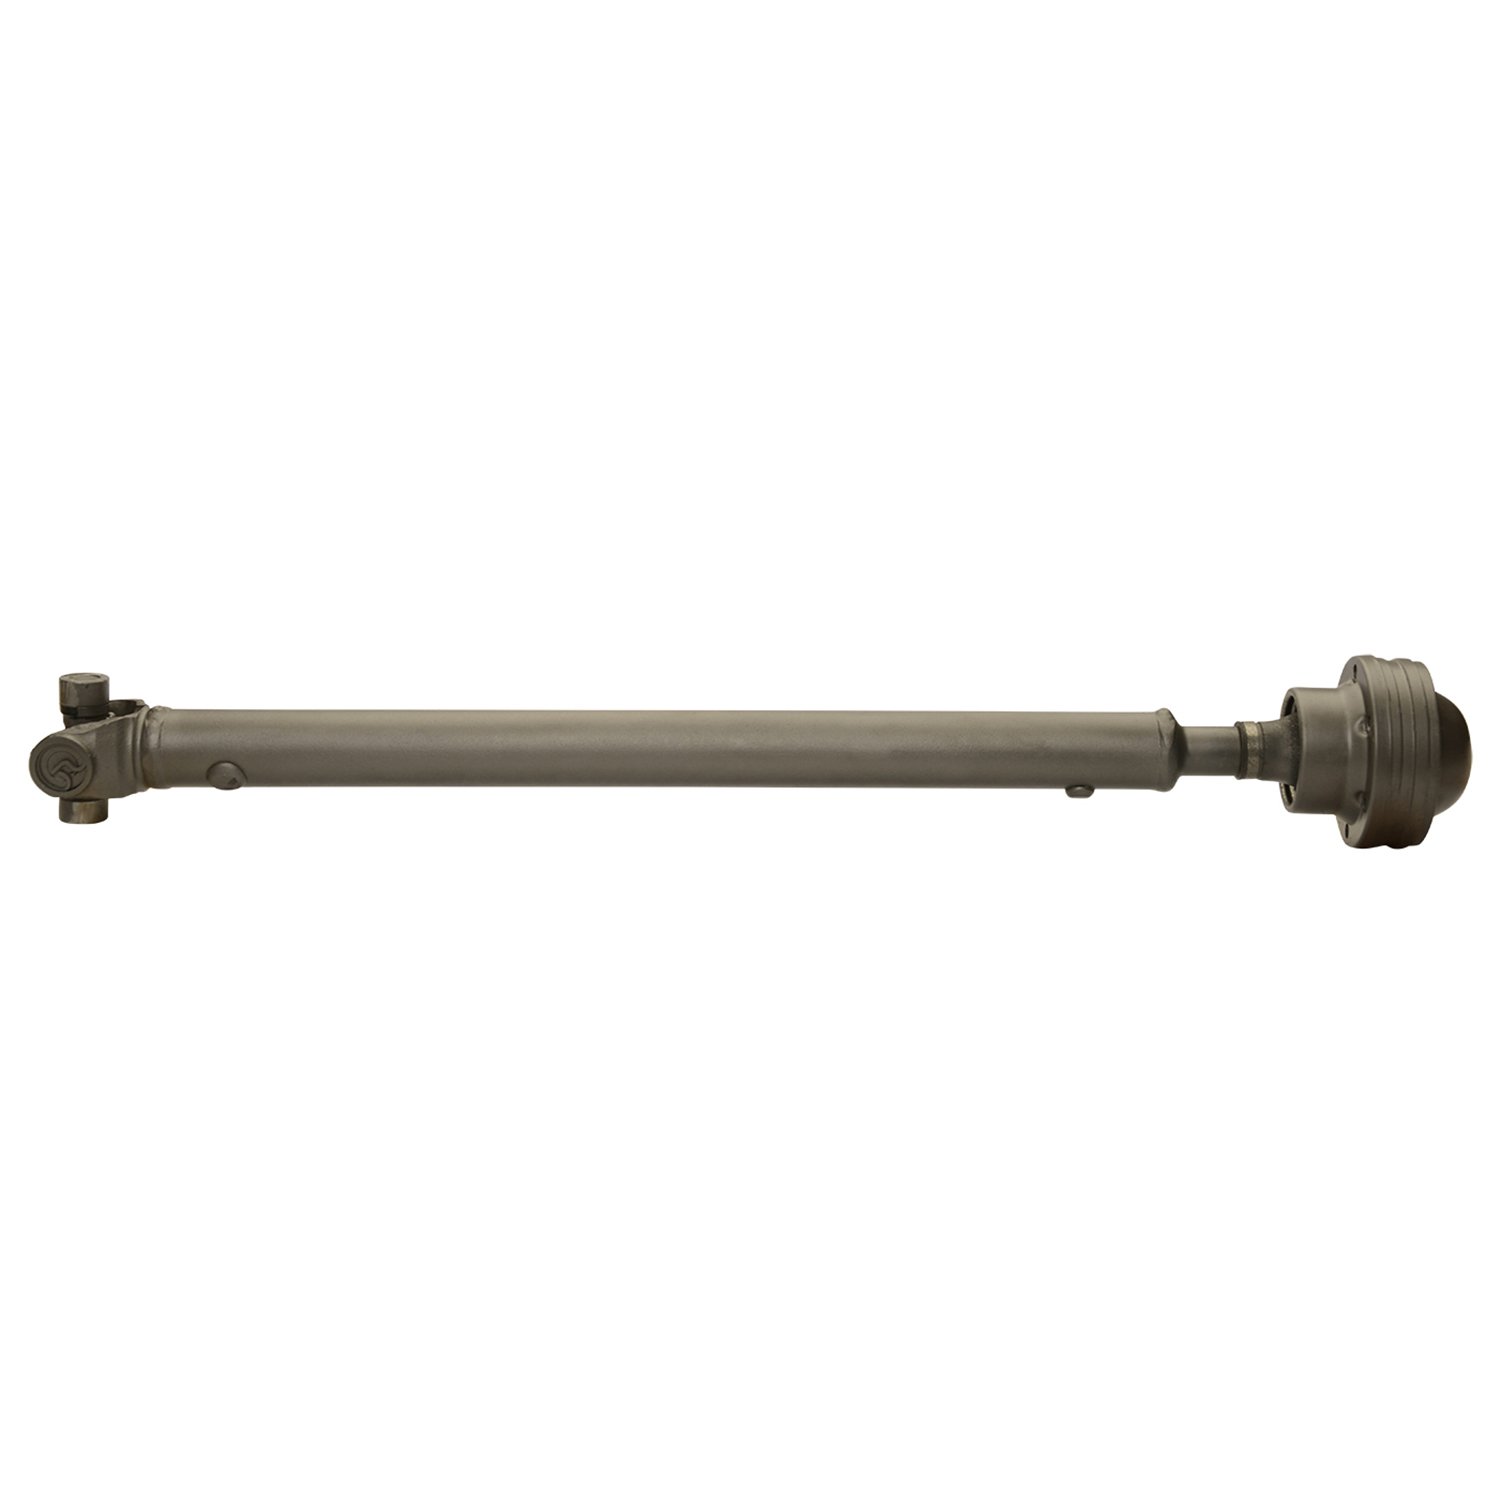 USA Standard ZDS9294 Front Driveshaft, For Ford Explorer & Mountaineer, 23 in. Weld-To-Weld